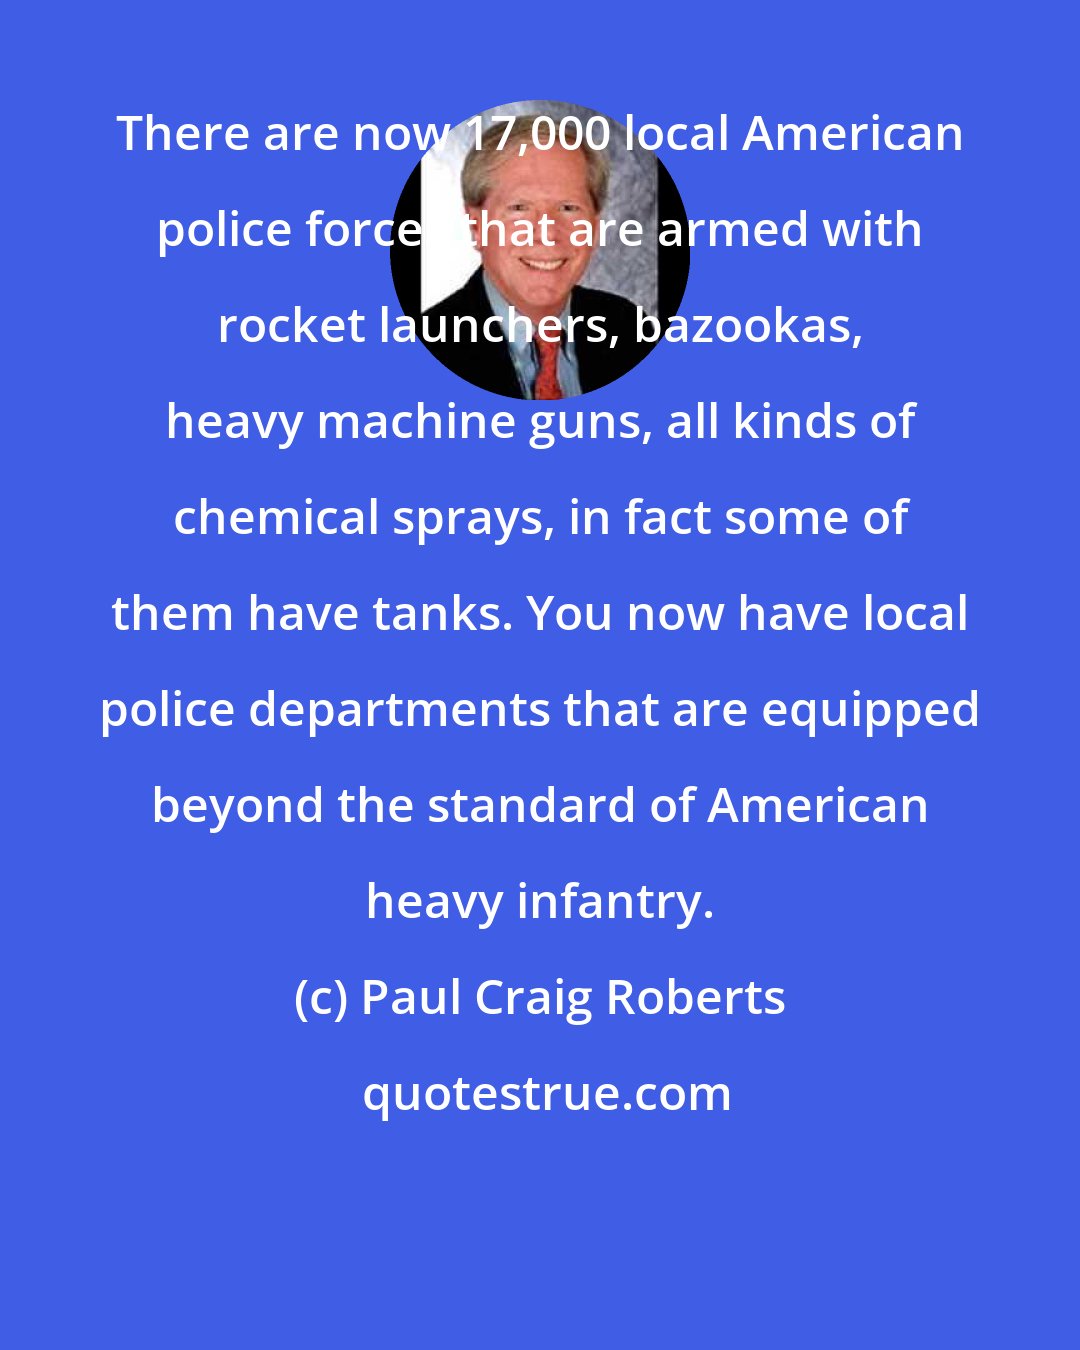 Paul Craig Roberts: There are now 17,000 local American police forces that are armed with rocket launchers, bazookas, heavy machine guns, all kinds of chemical sprays, in fact some of them have tanks. You now have local police departments that are equipped beyond the standard of American heavy infantry.